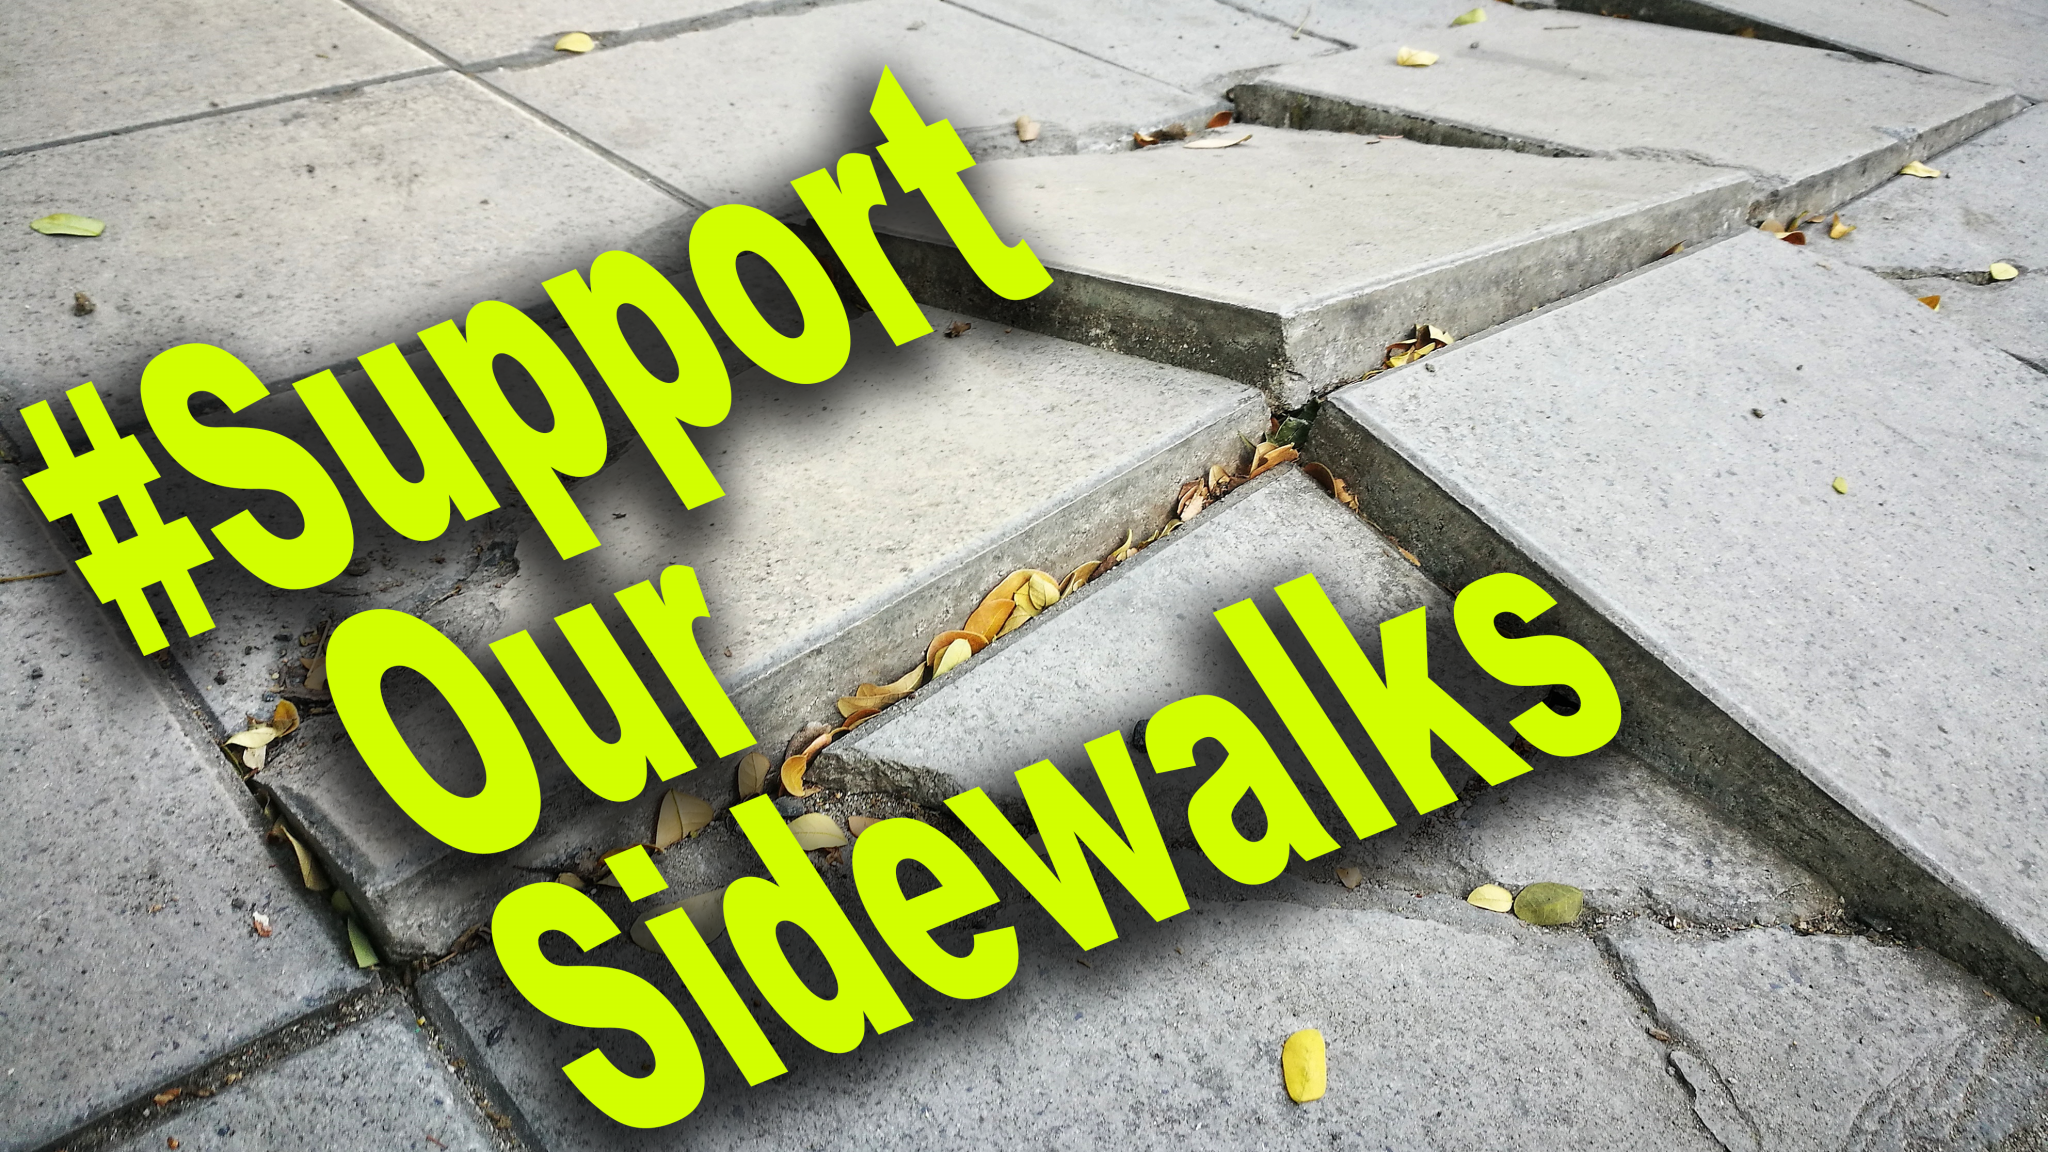 Bright green text reads "Support Our Sidewalks" on top of a photograph of broken cement.